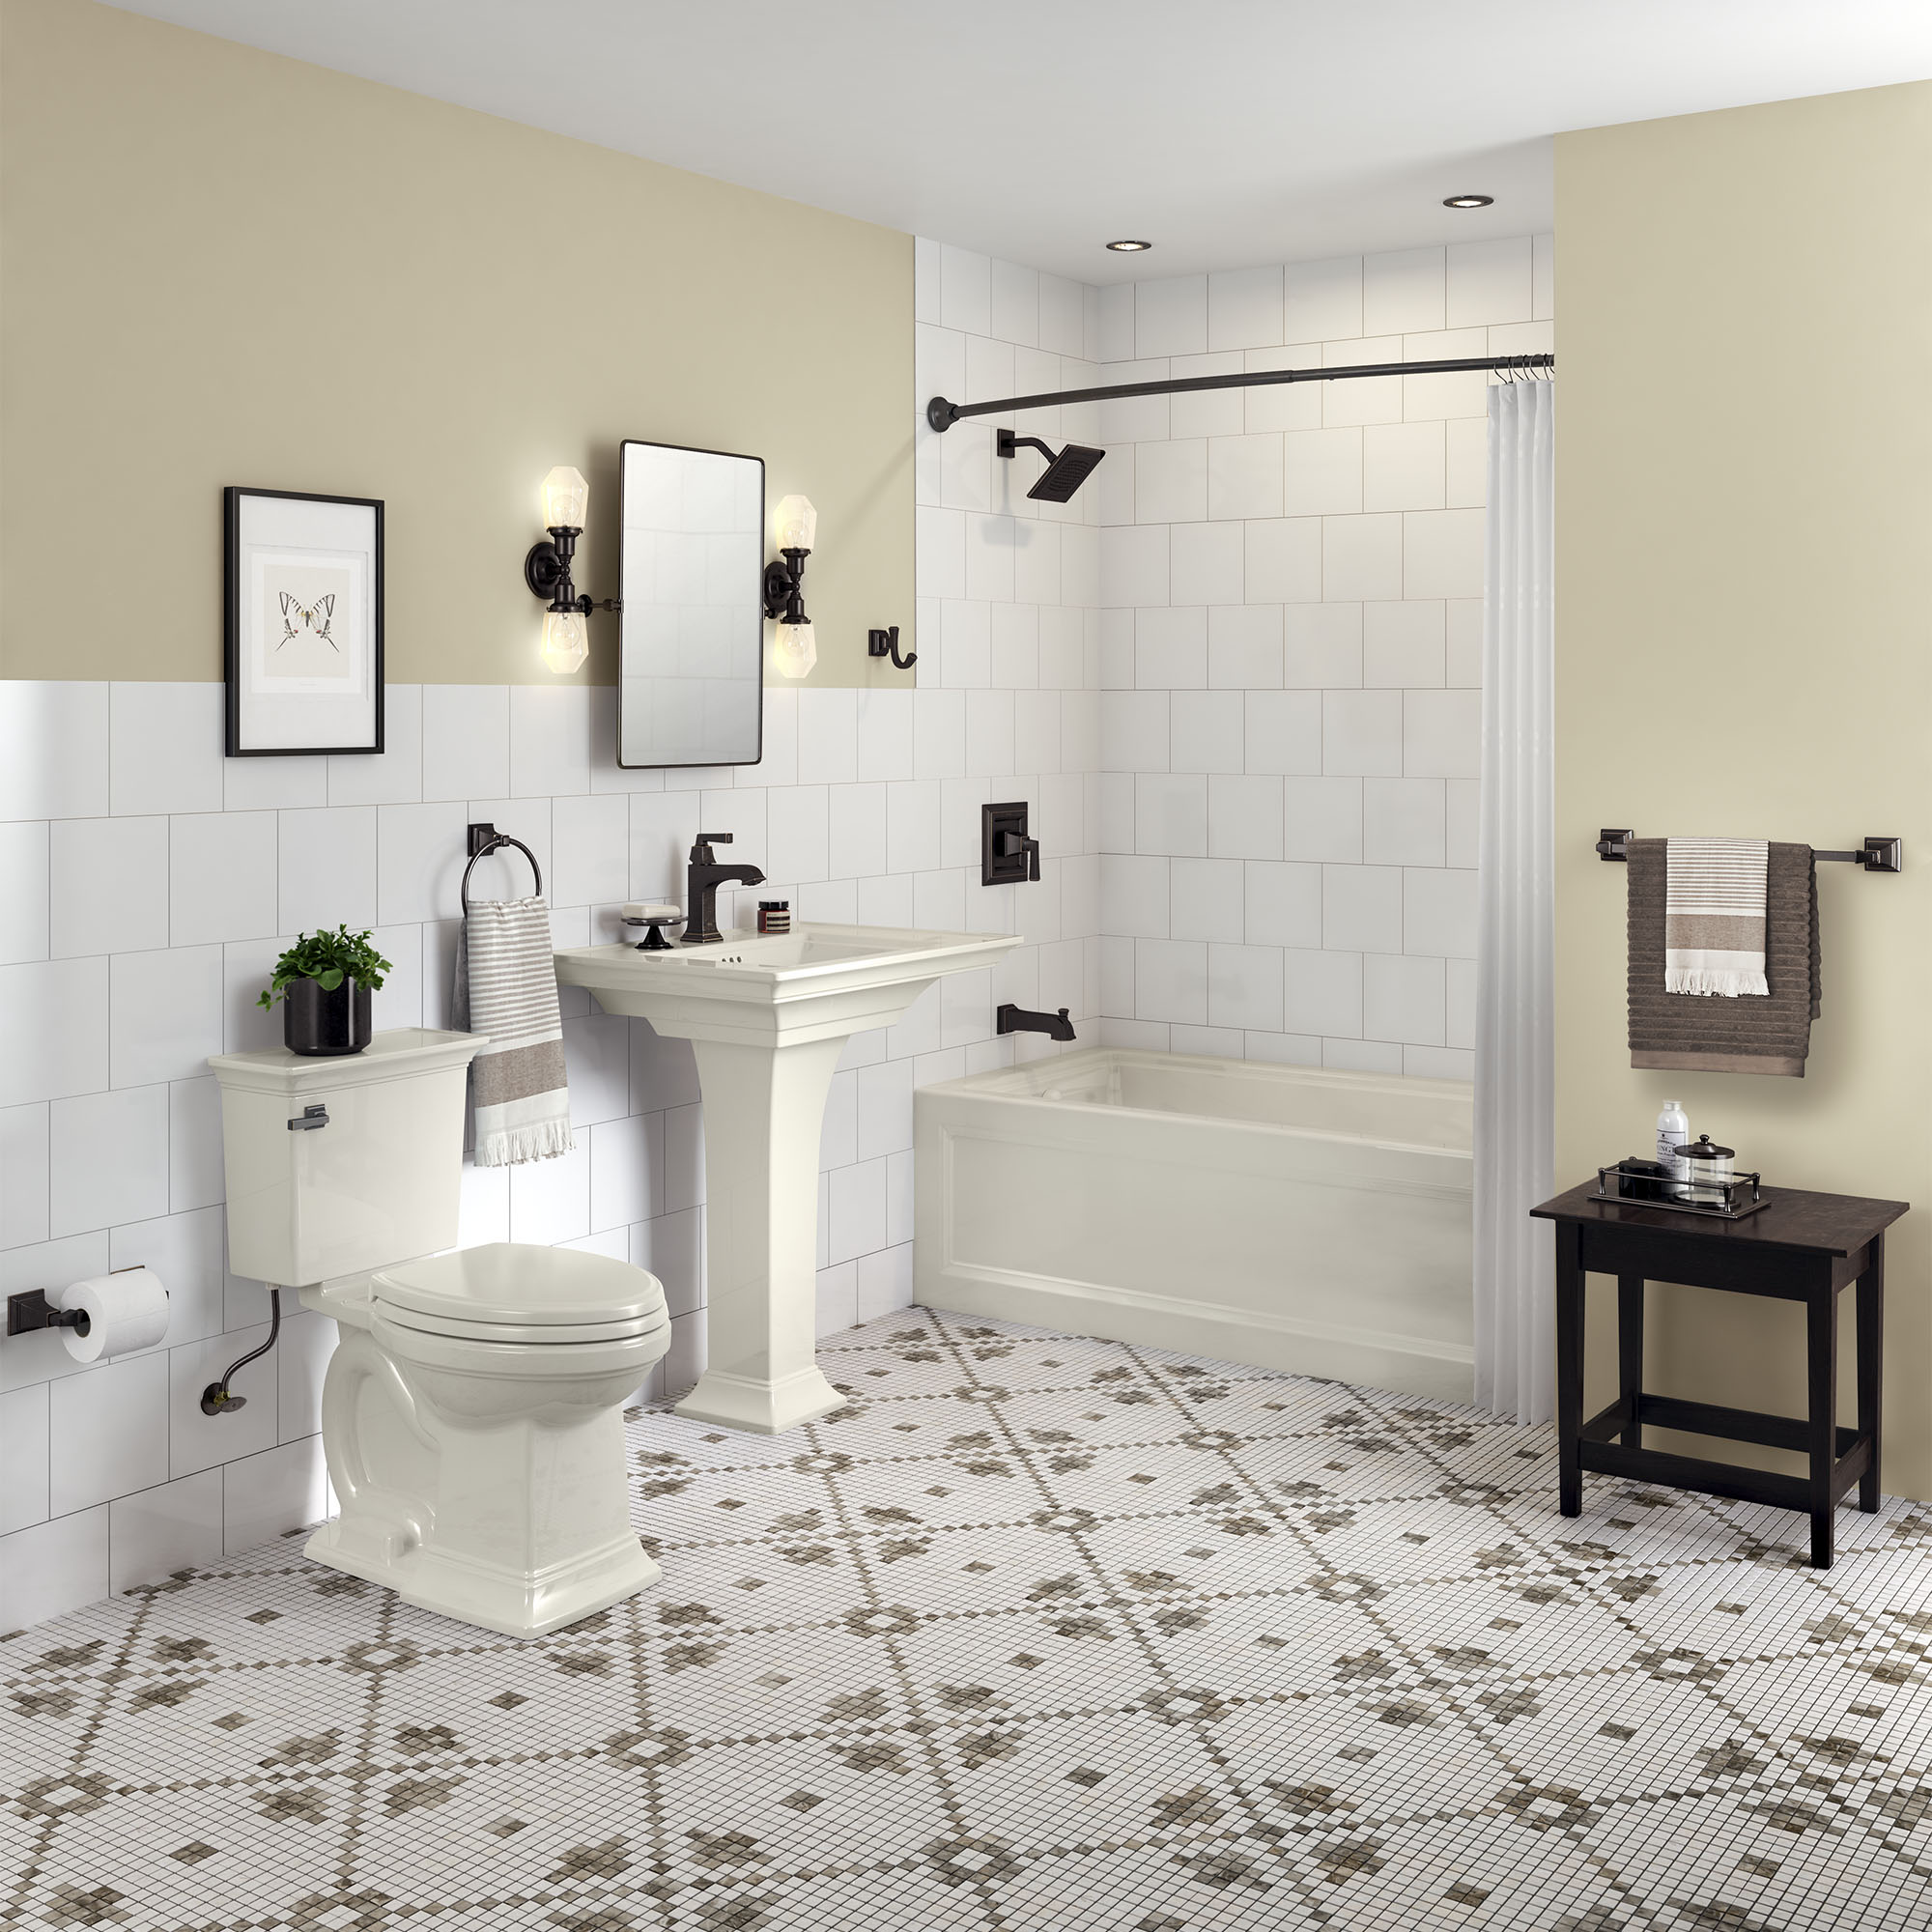 Town Square® S Center Hole Only Pedestal Sink Top